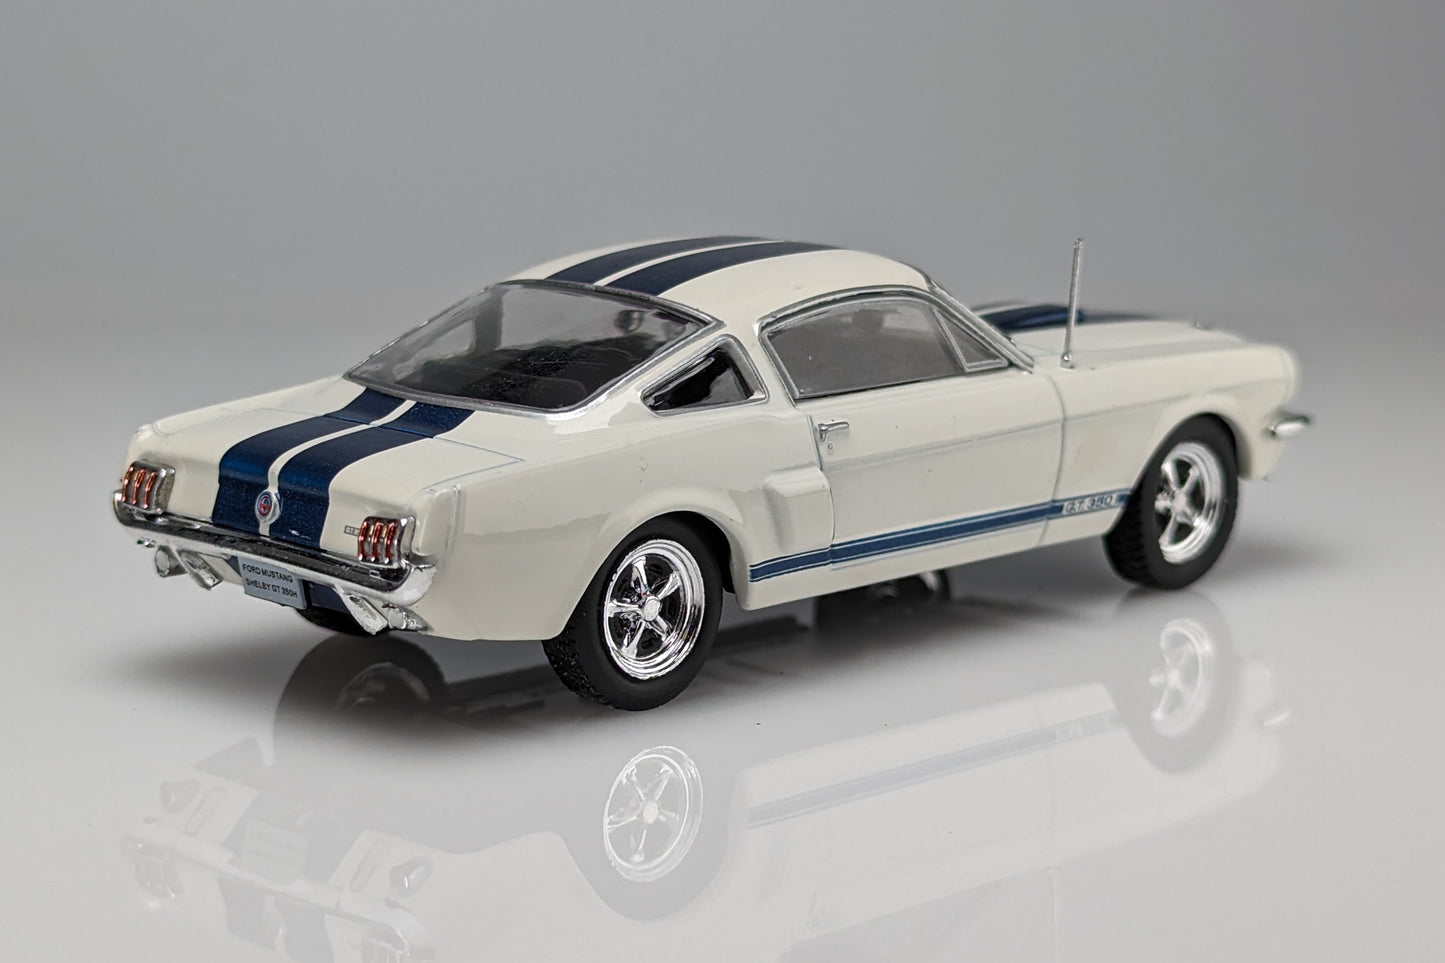 1965 Ford Mustang Shelby GT350H